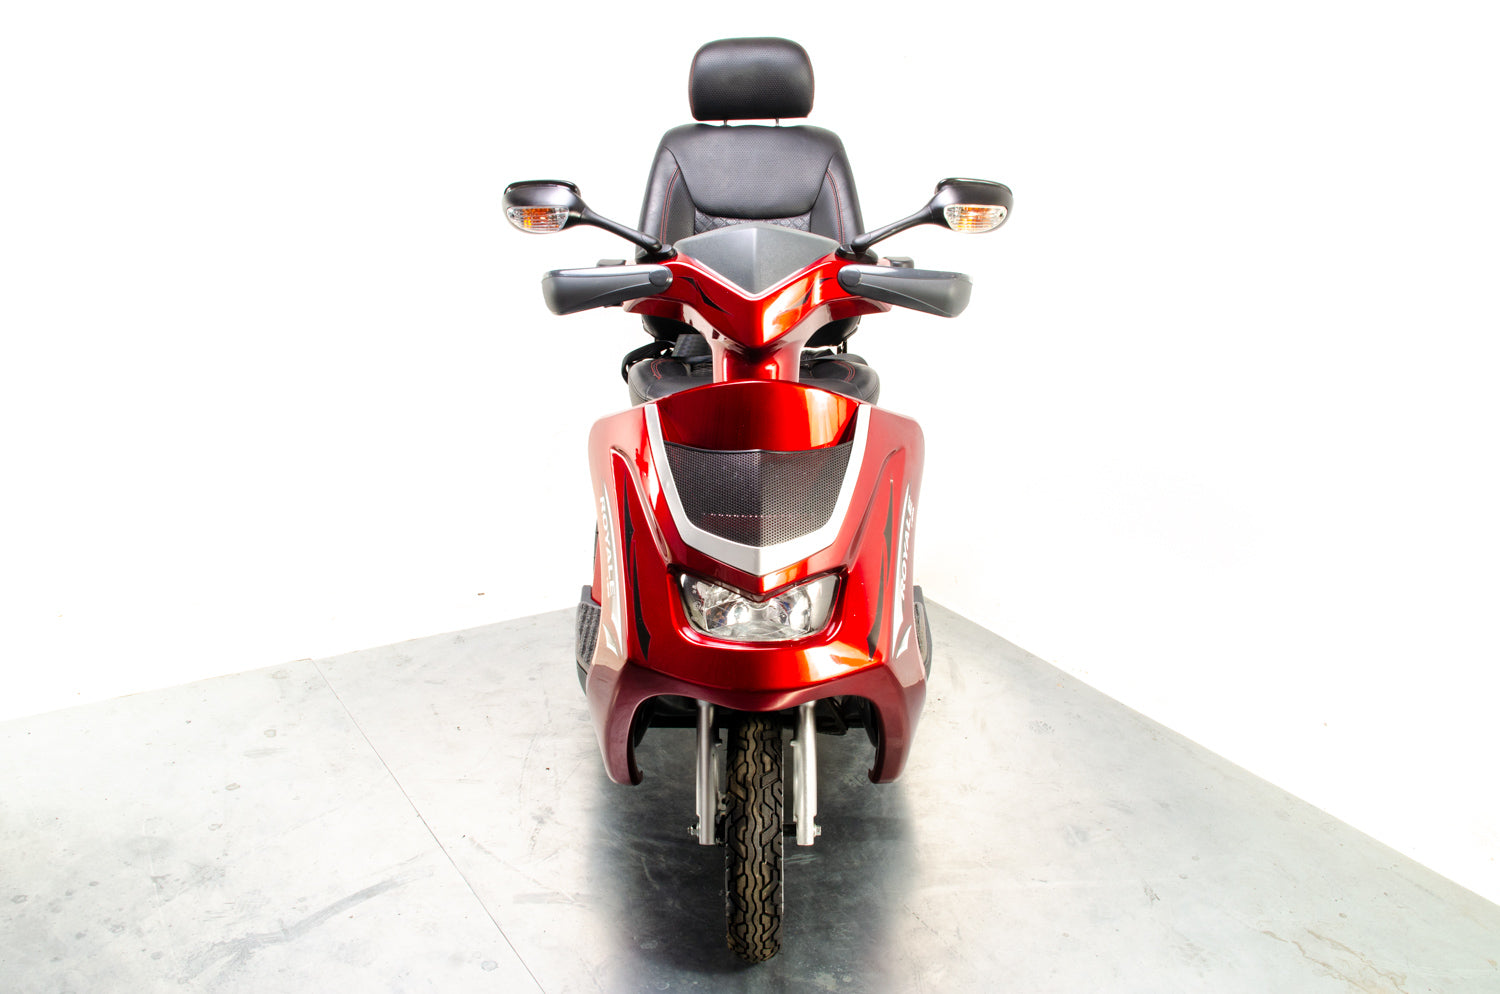 Drive Royale 3 8mph Large Comfort Class 3 Mobility Scooter Trike Red